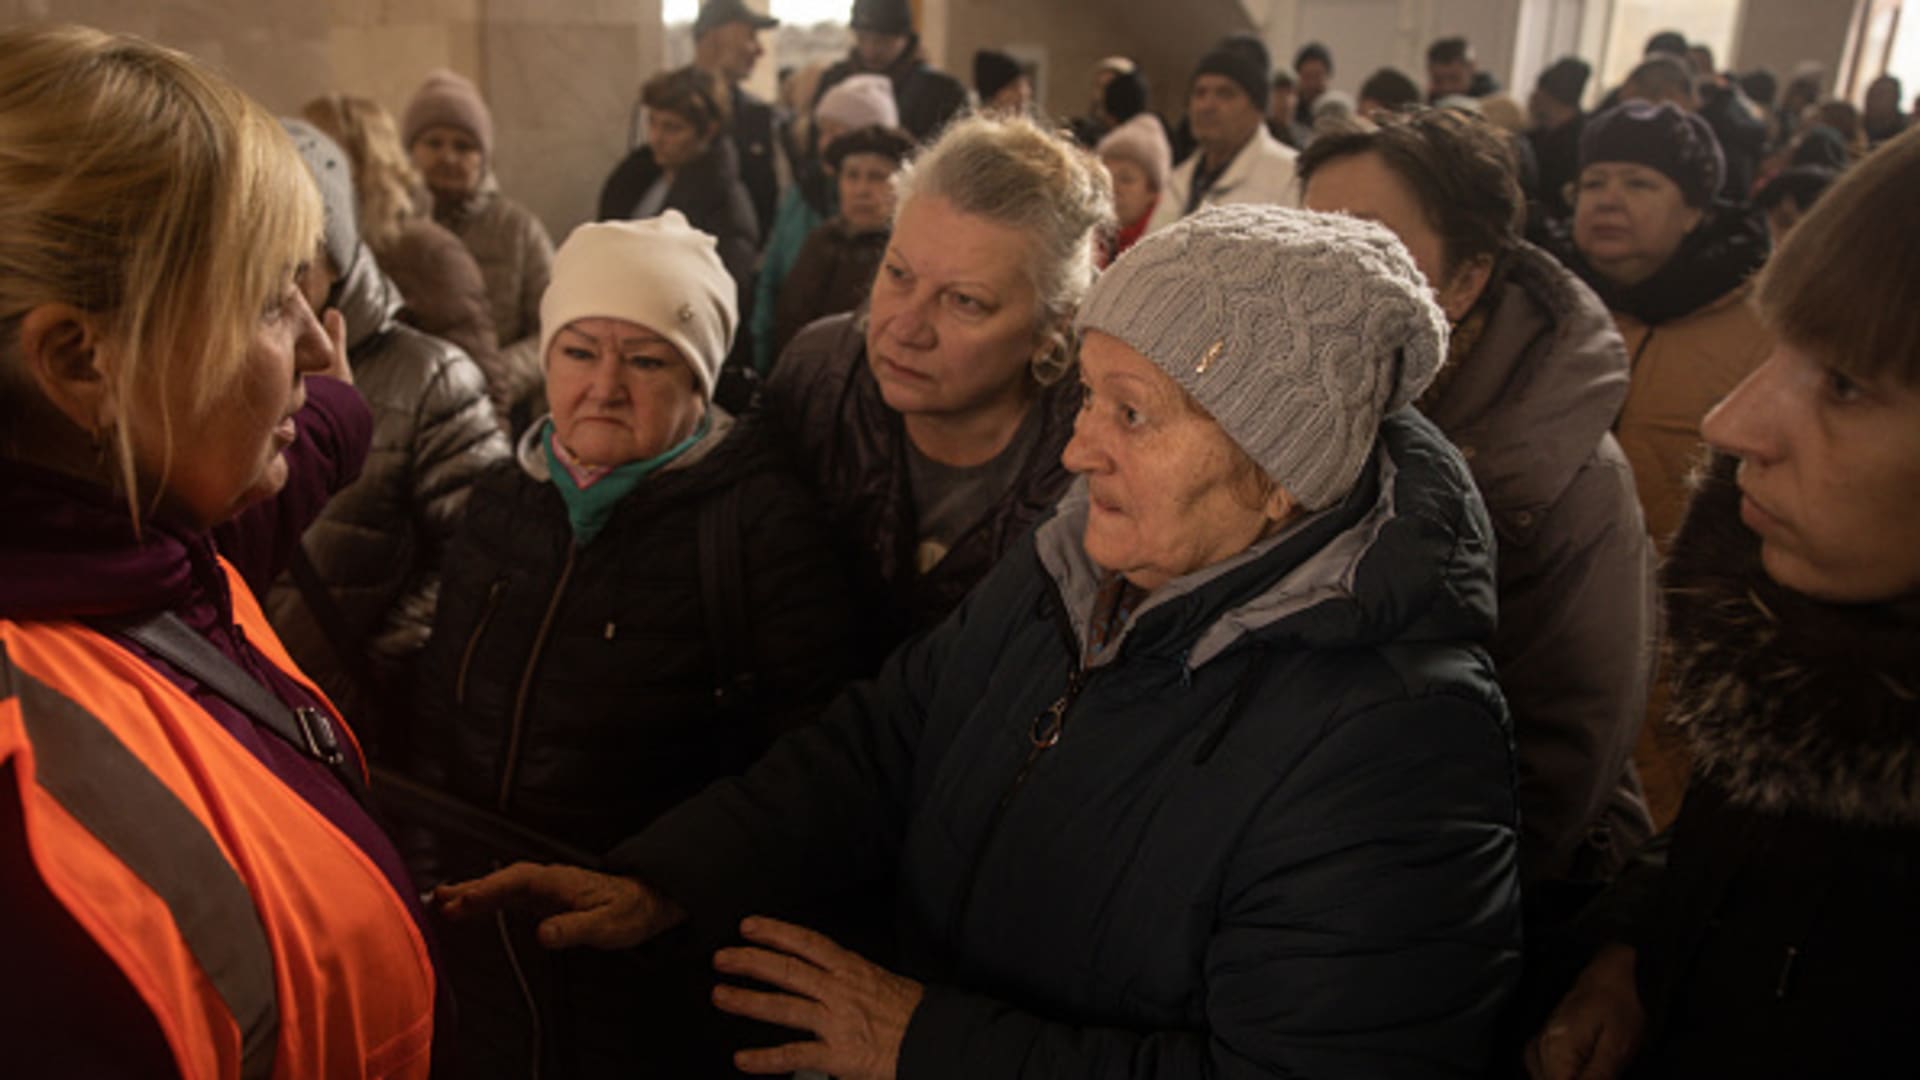 Residents talk with train station staff while waiting to be evacuated from Kherson on Nov. 21, 2022 in Kherson, Ukraine. The recently de-occupied city of Kherson is feeling power and water shortages acutely.